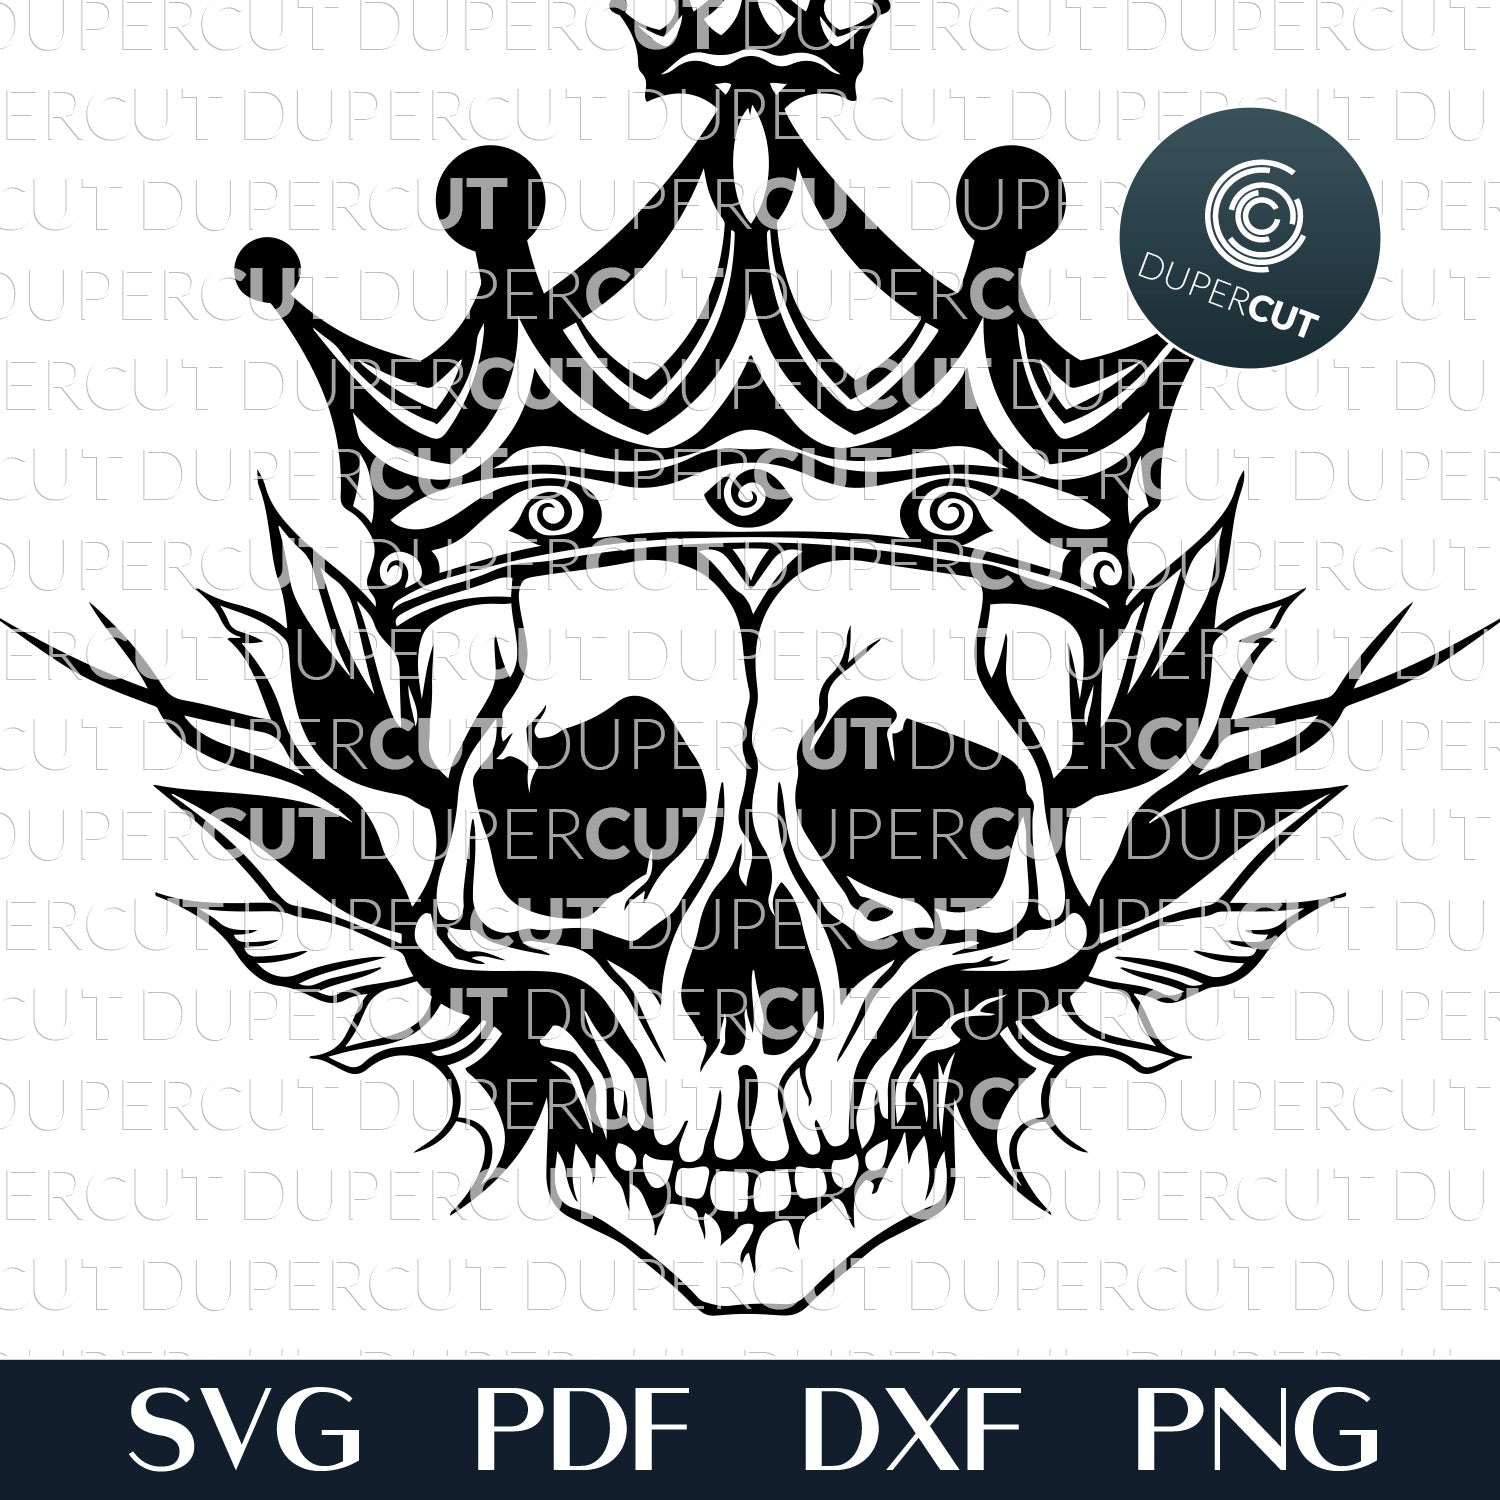 Skull king with crown, steampunk gothic cutting pattern - SVG DXF PNG vector files for Glowforge, Cricut, silhouette Cameo, CNC plasma machines by www.DuperCut.com